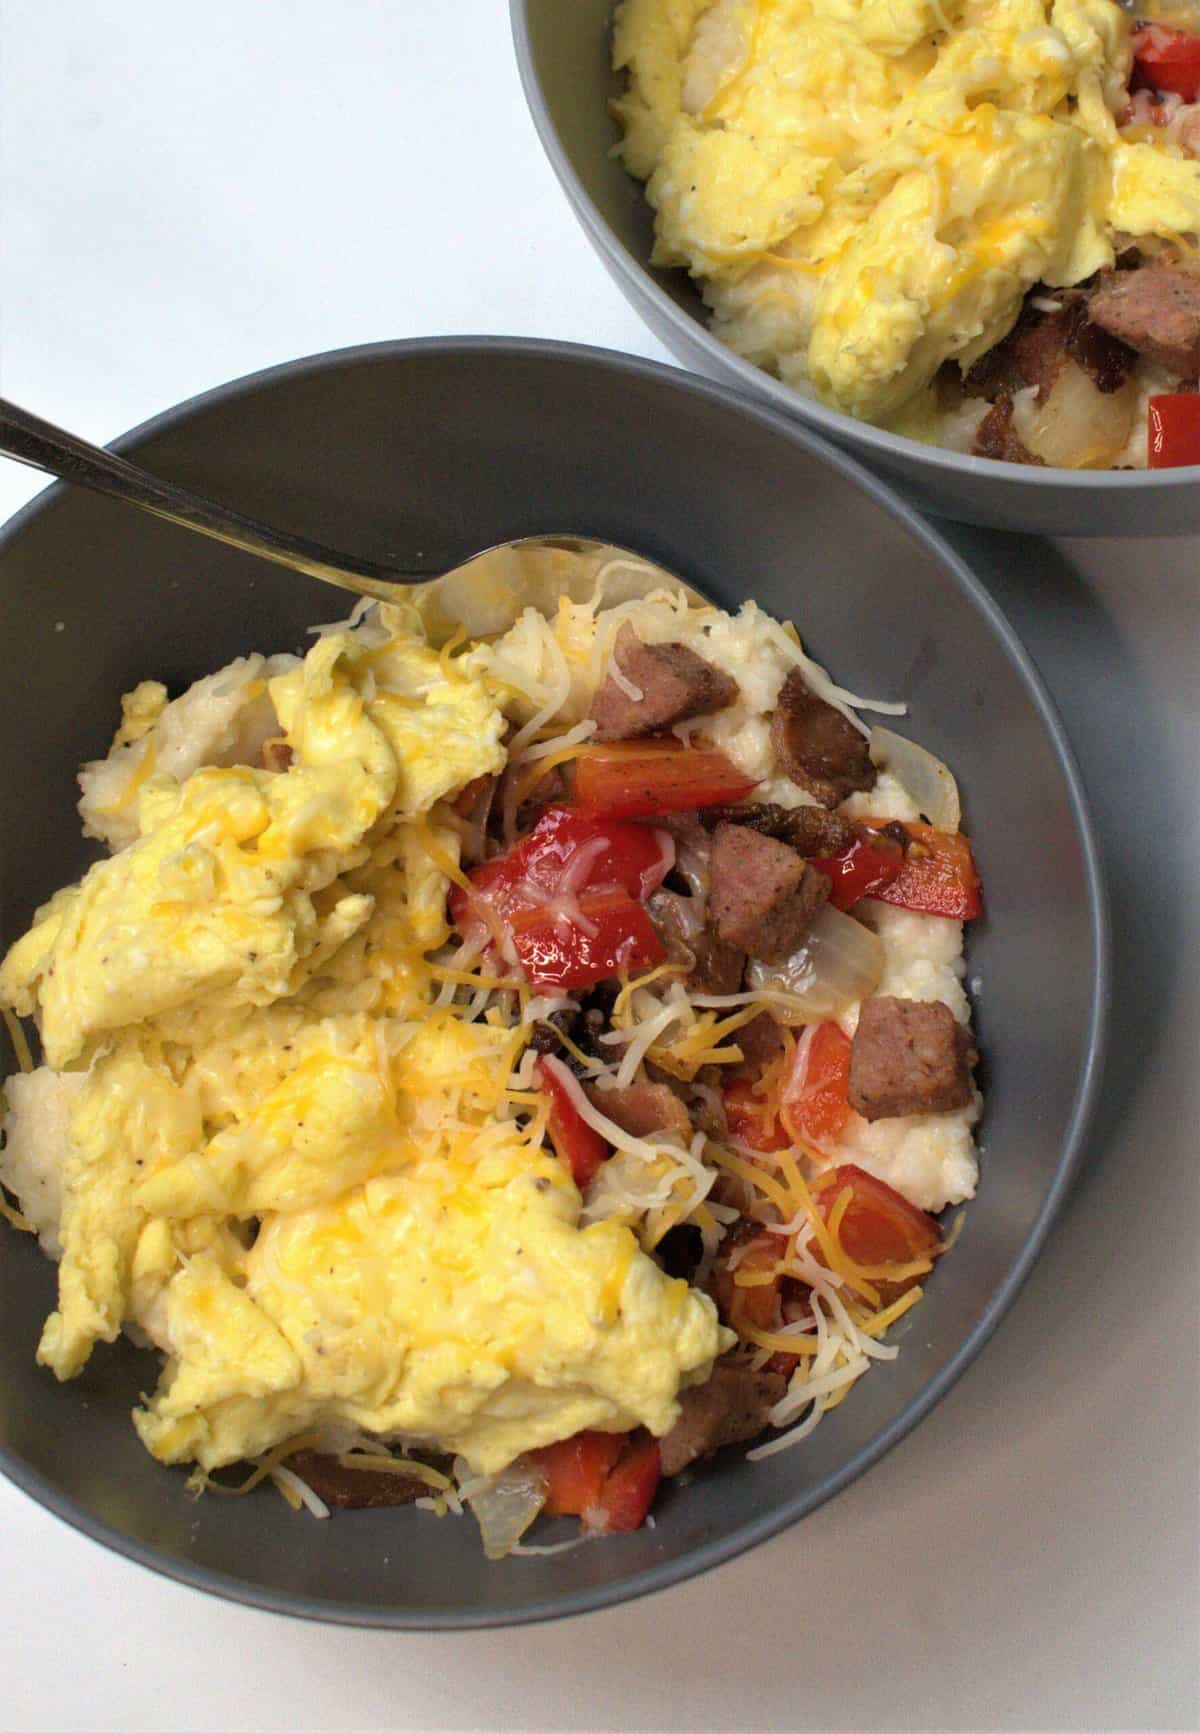 bowl of grits with eggs and meat